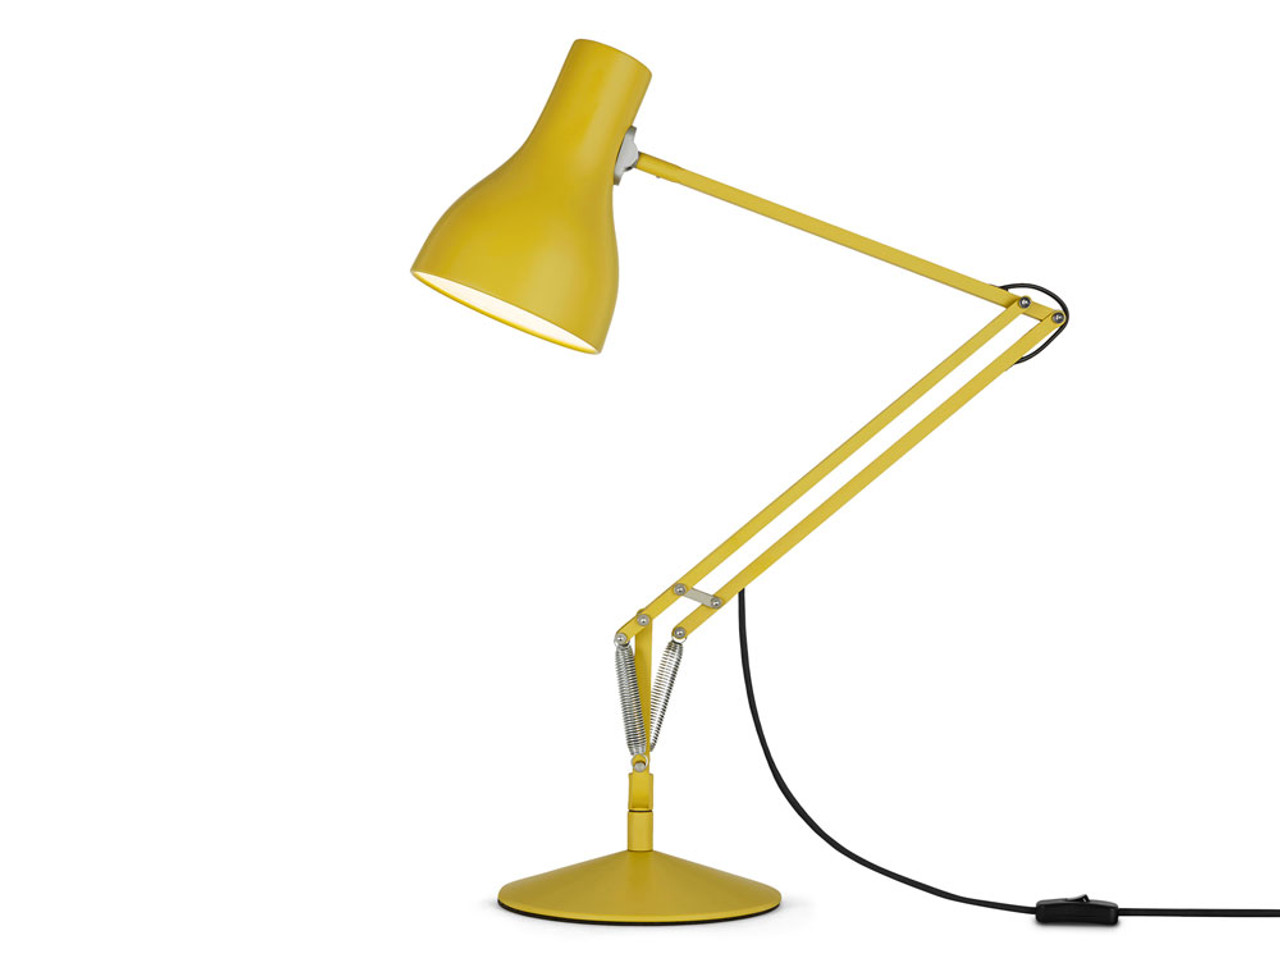 Anglepoise Type 75 Margaret Howell Edition Desk Lamp by Sir Kenneth Grange